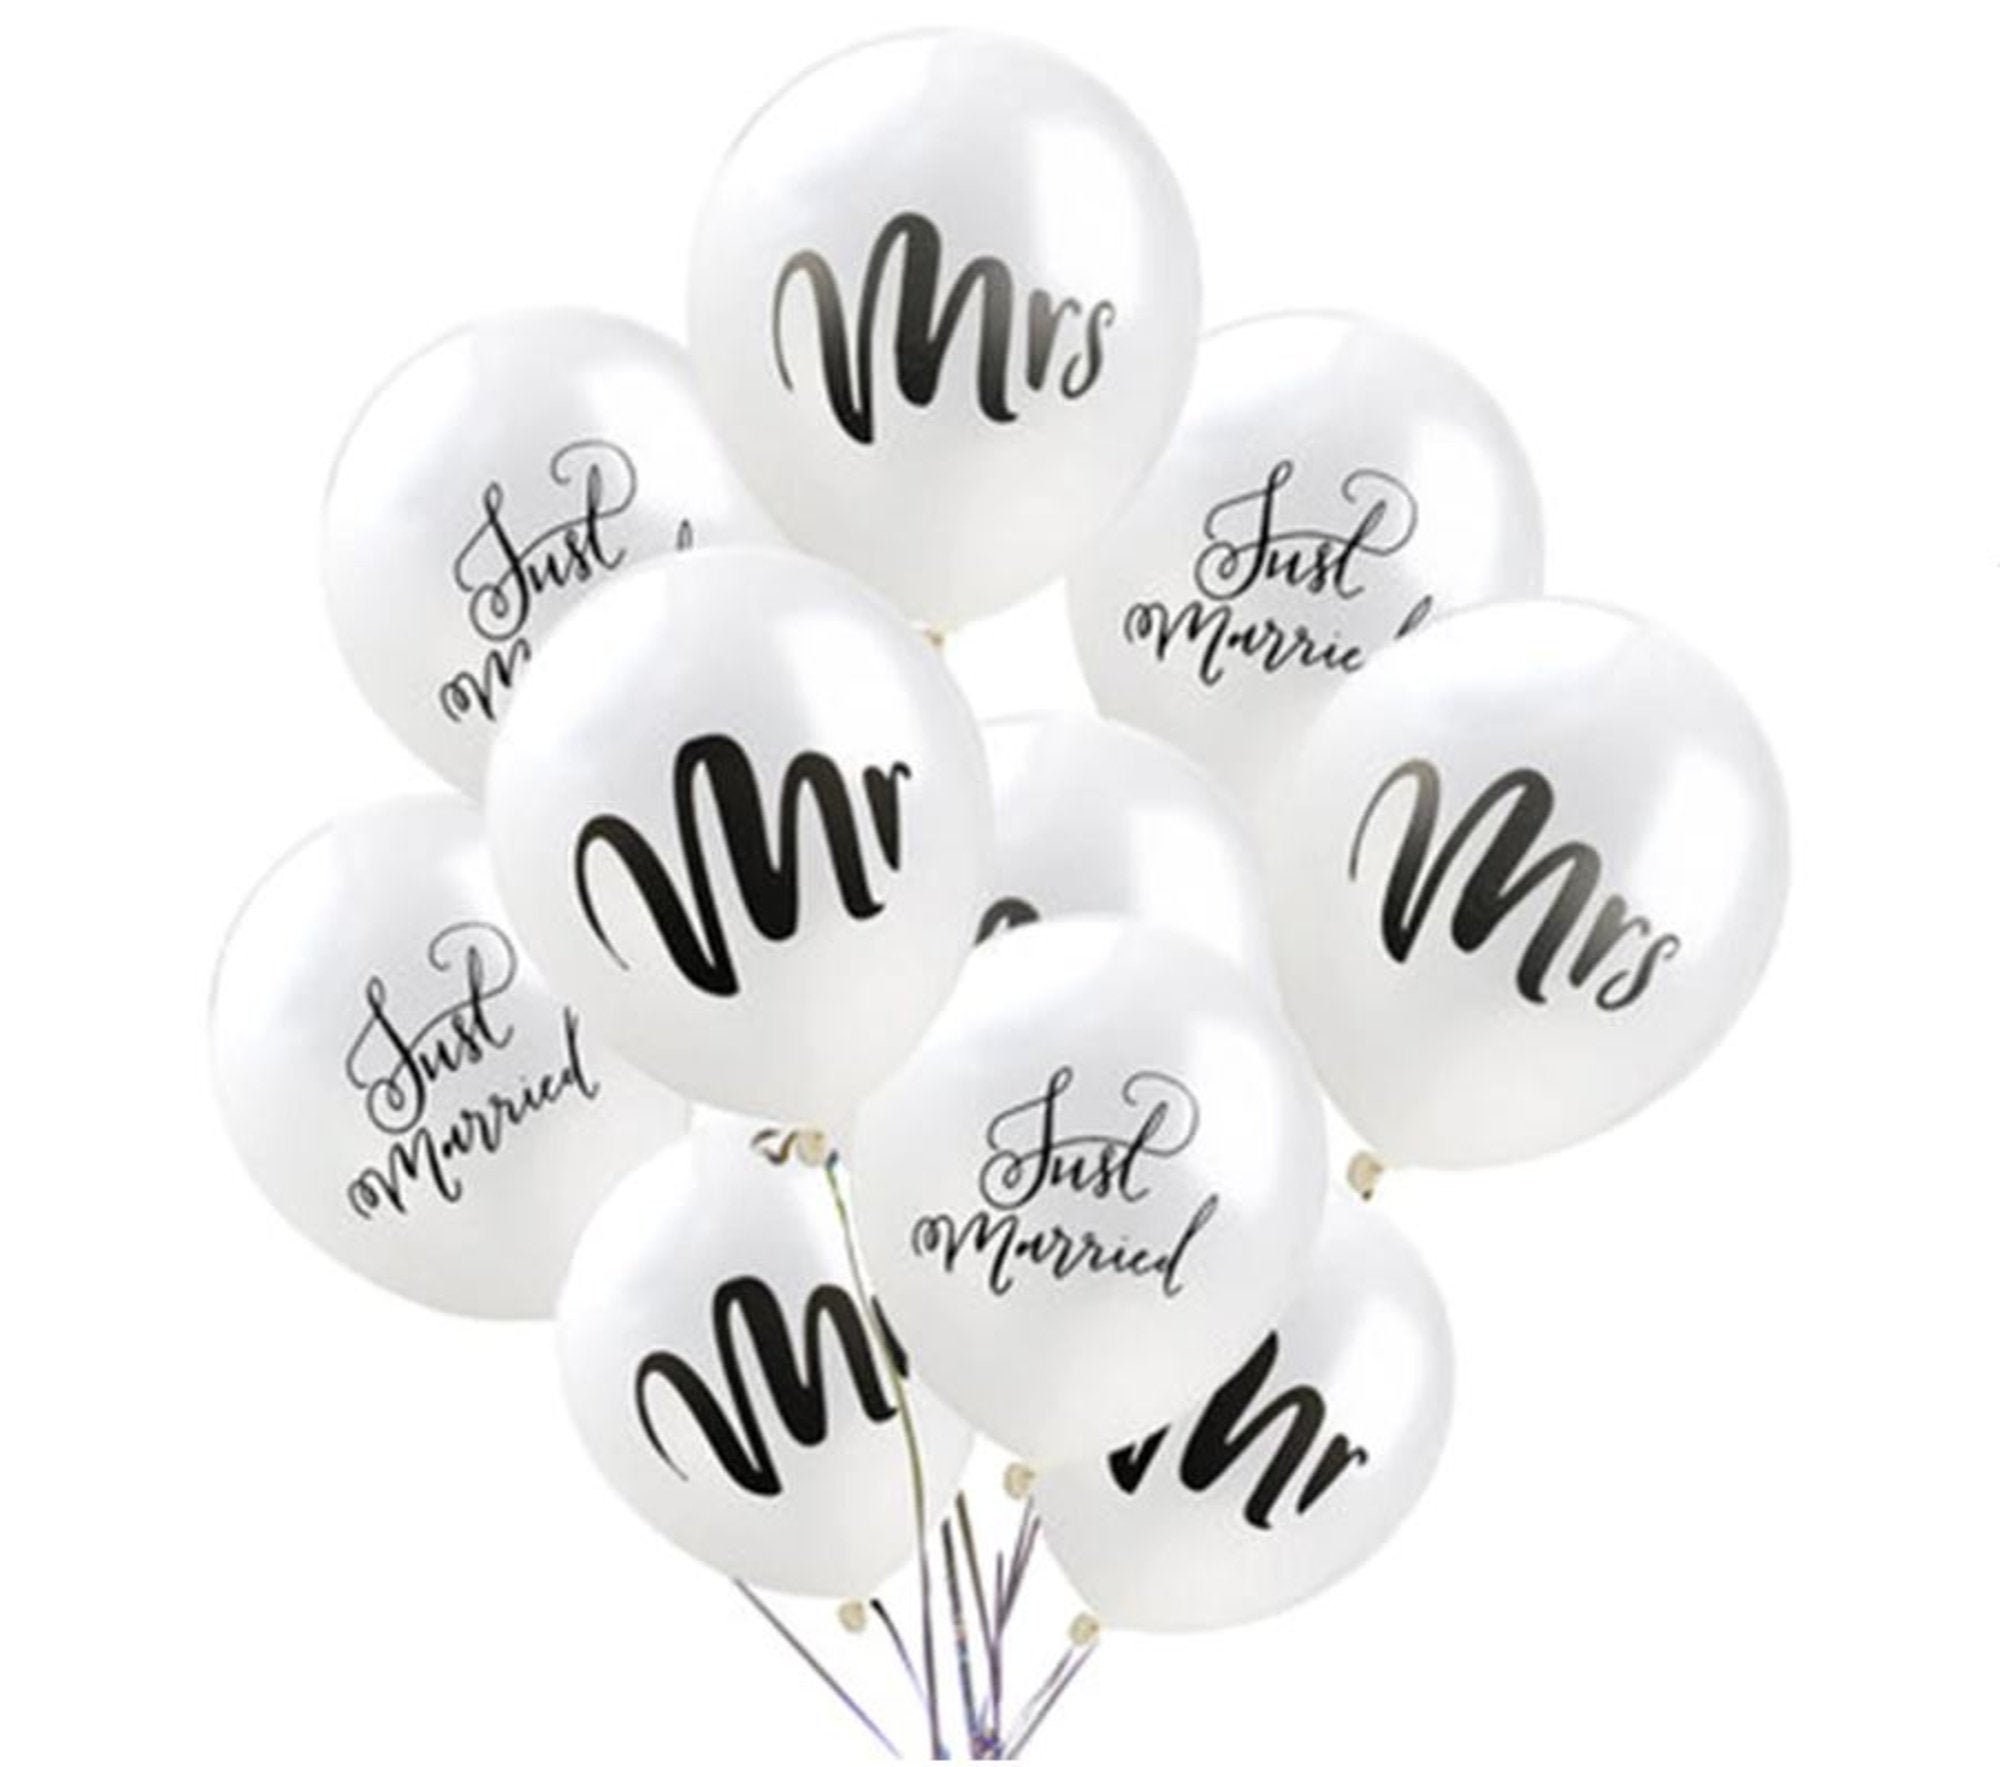 10 Pack Just Married Blanc Ballons-Latex Blanc Mariage Ballons